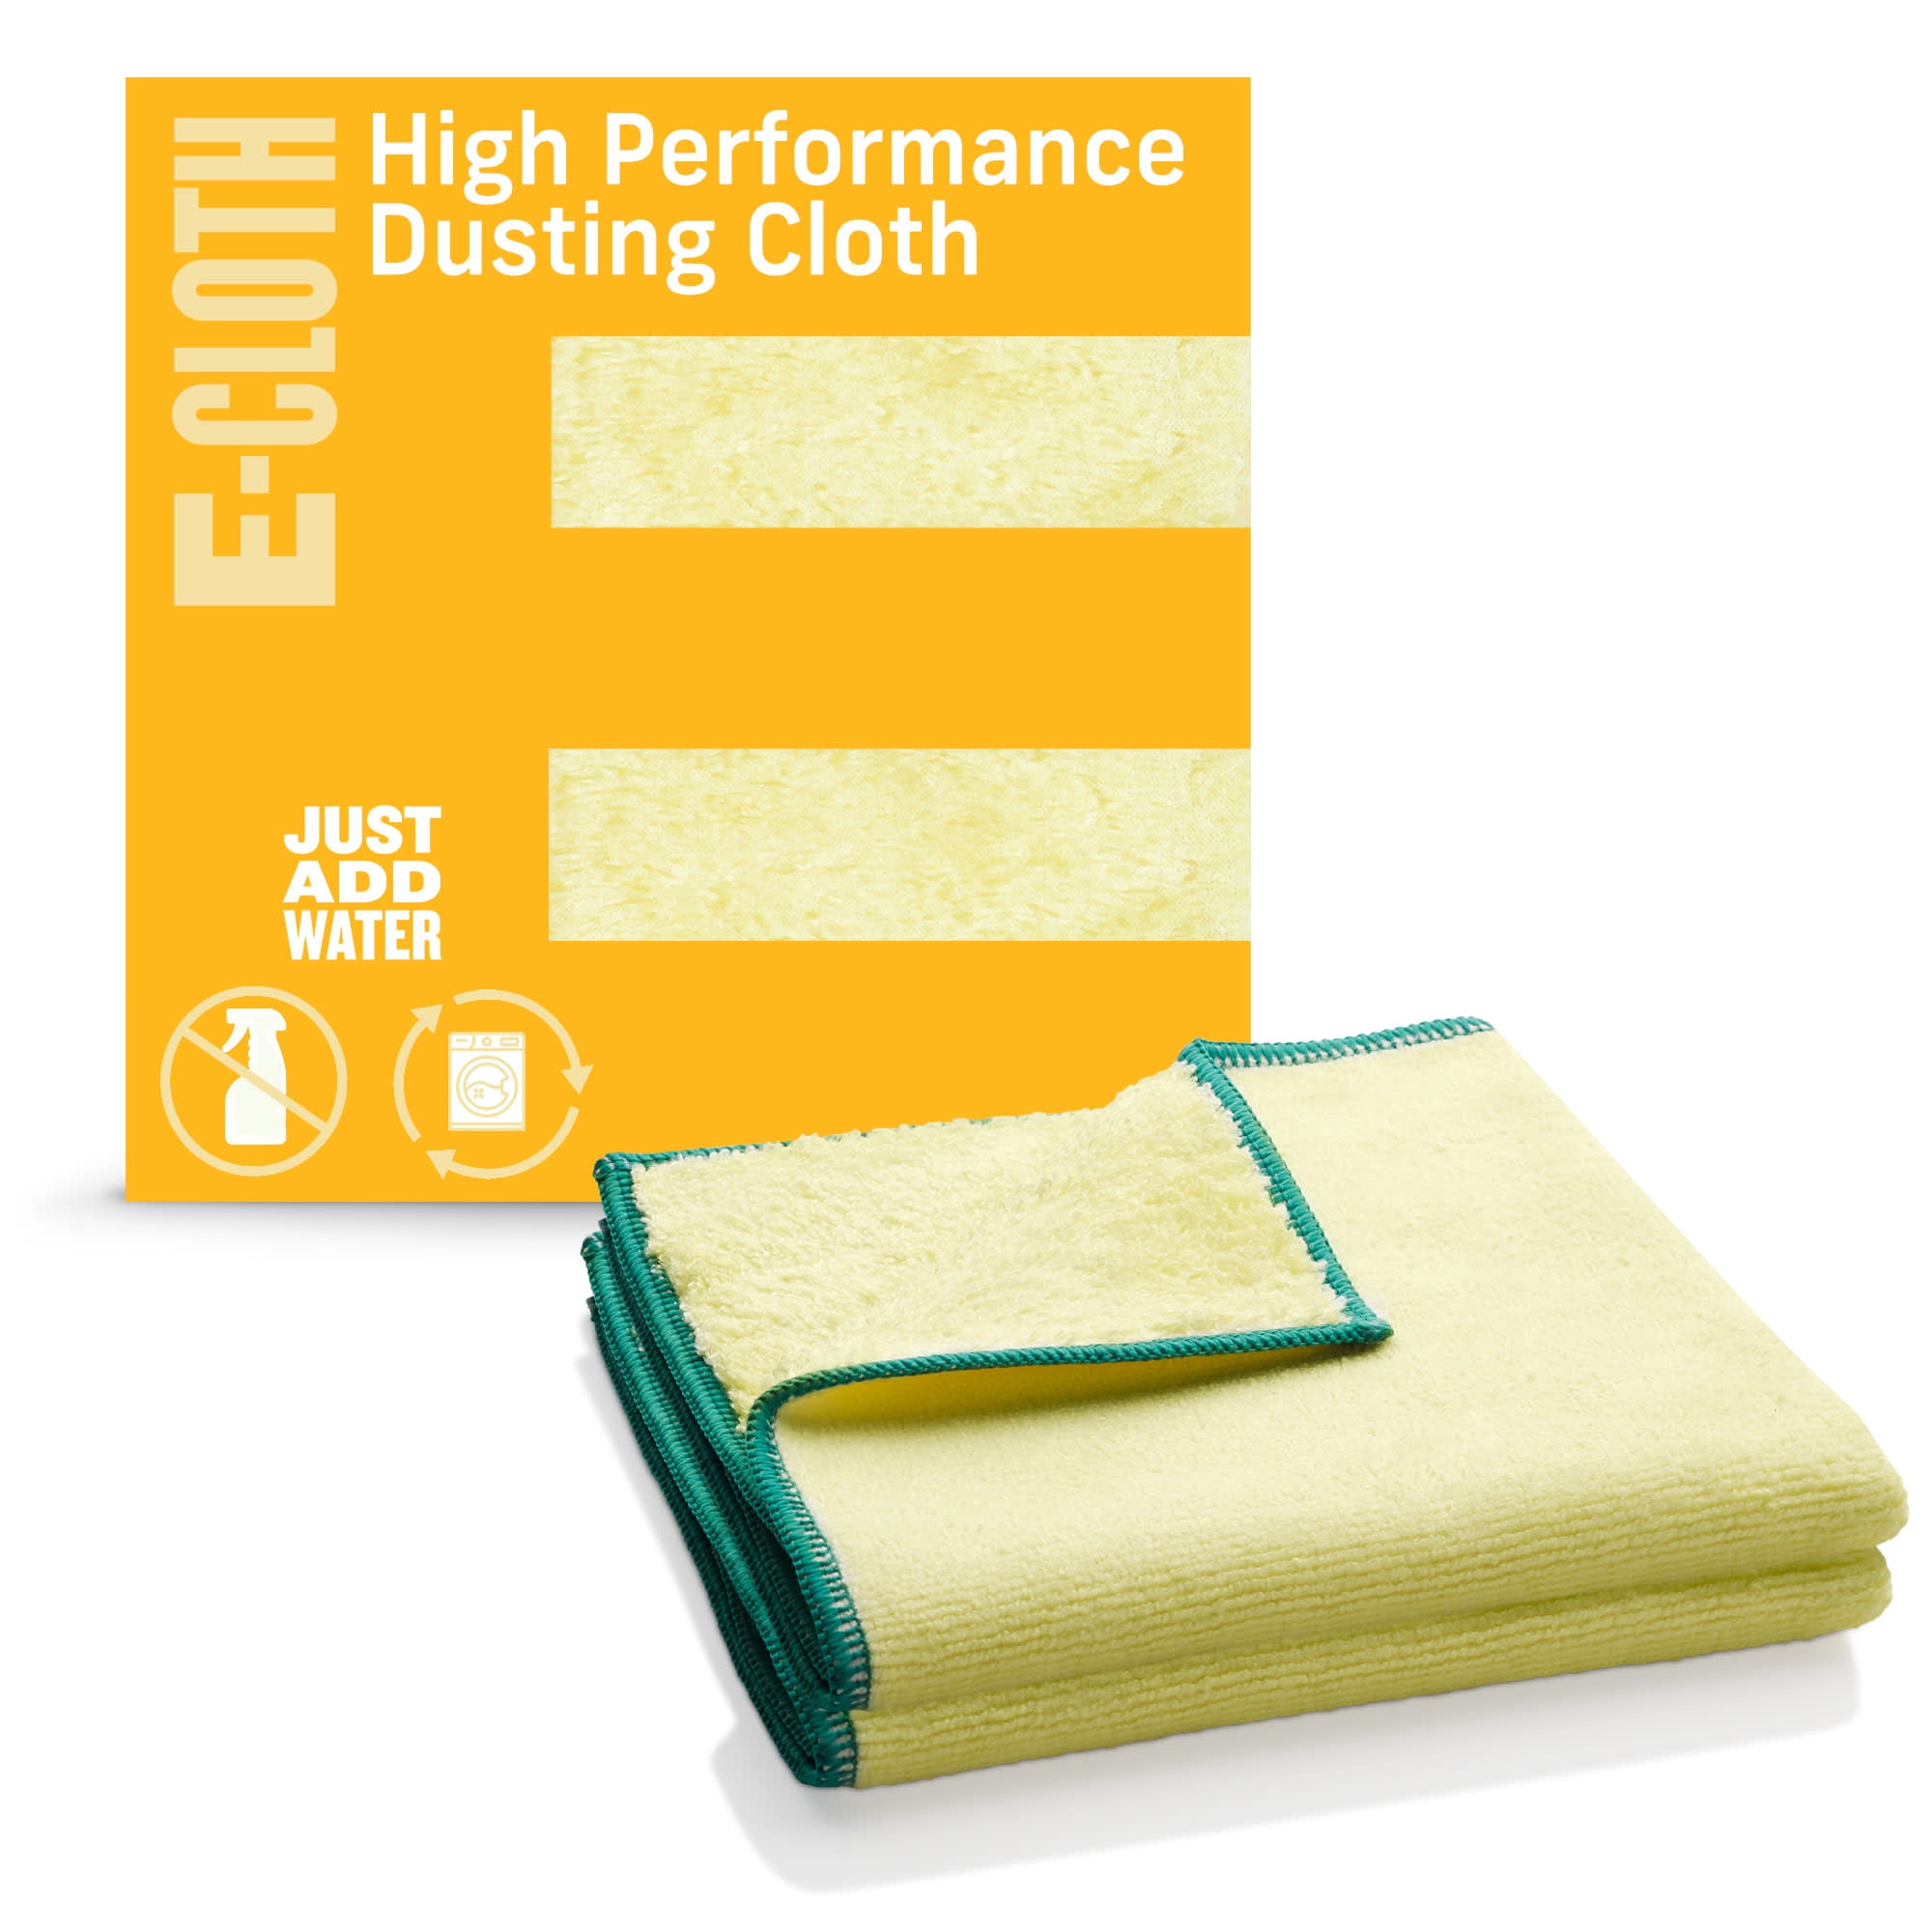 Scrub Daddy Microfiber Cloths - All Purpose Super Soft & Ultra Plush  Microfiber Towels - Contains Grey & Yellow Cleaning Rags, 2 Count